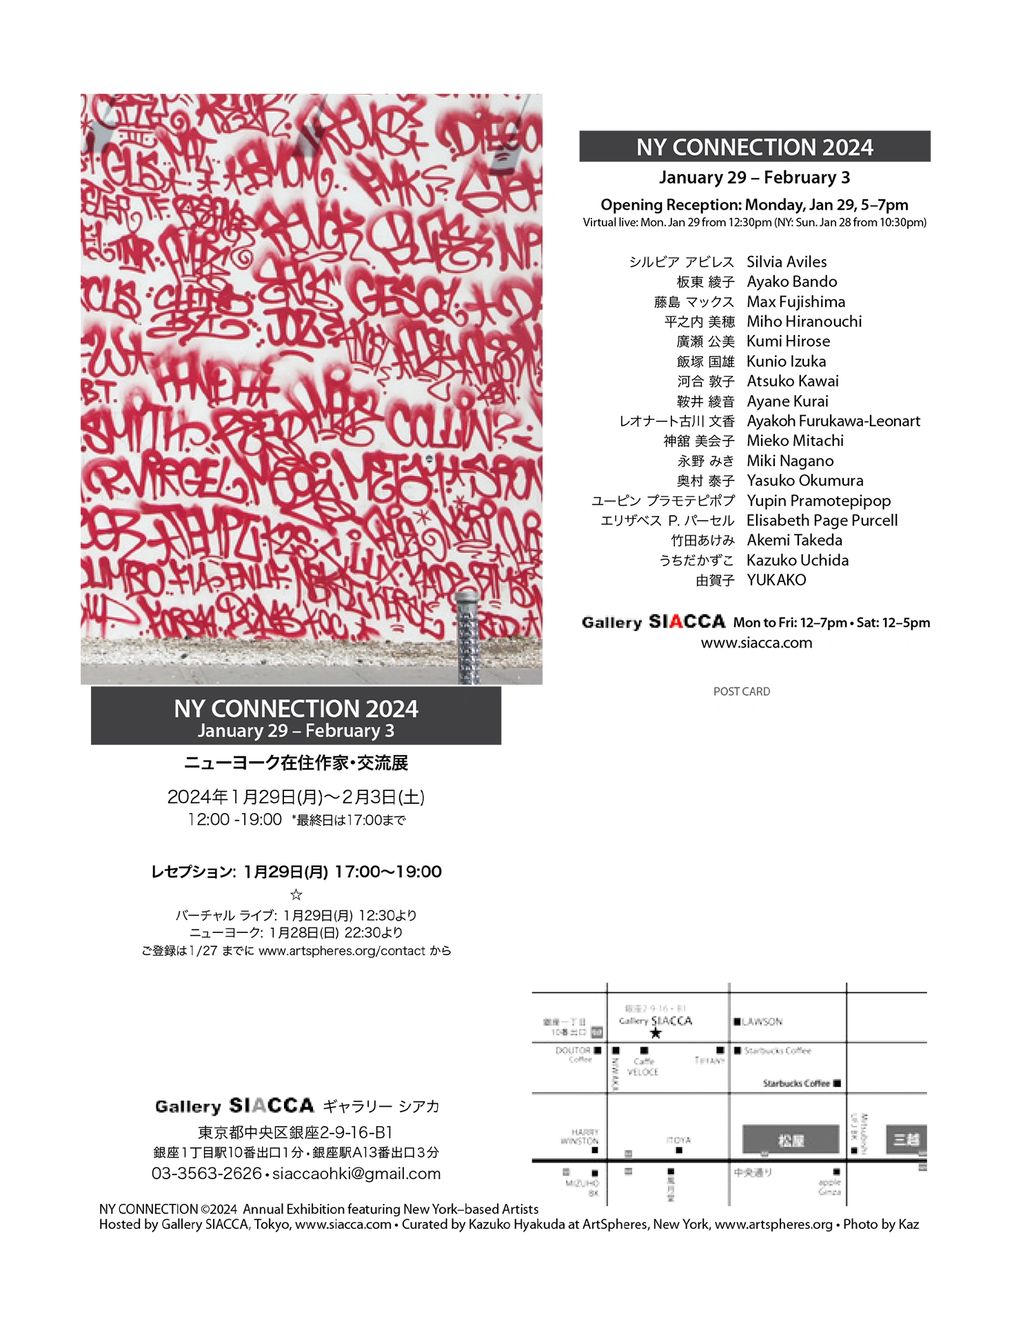 NY Connection 2024, Tokyo, Ginza group exhibition at Gallery Siacca, Curated by Kazuko Hyakuda